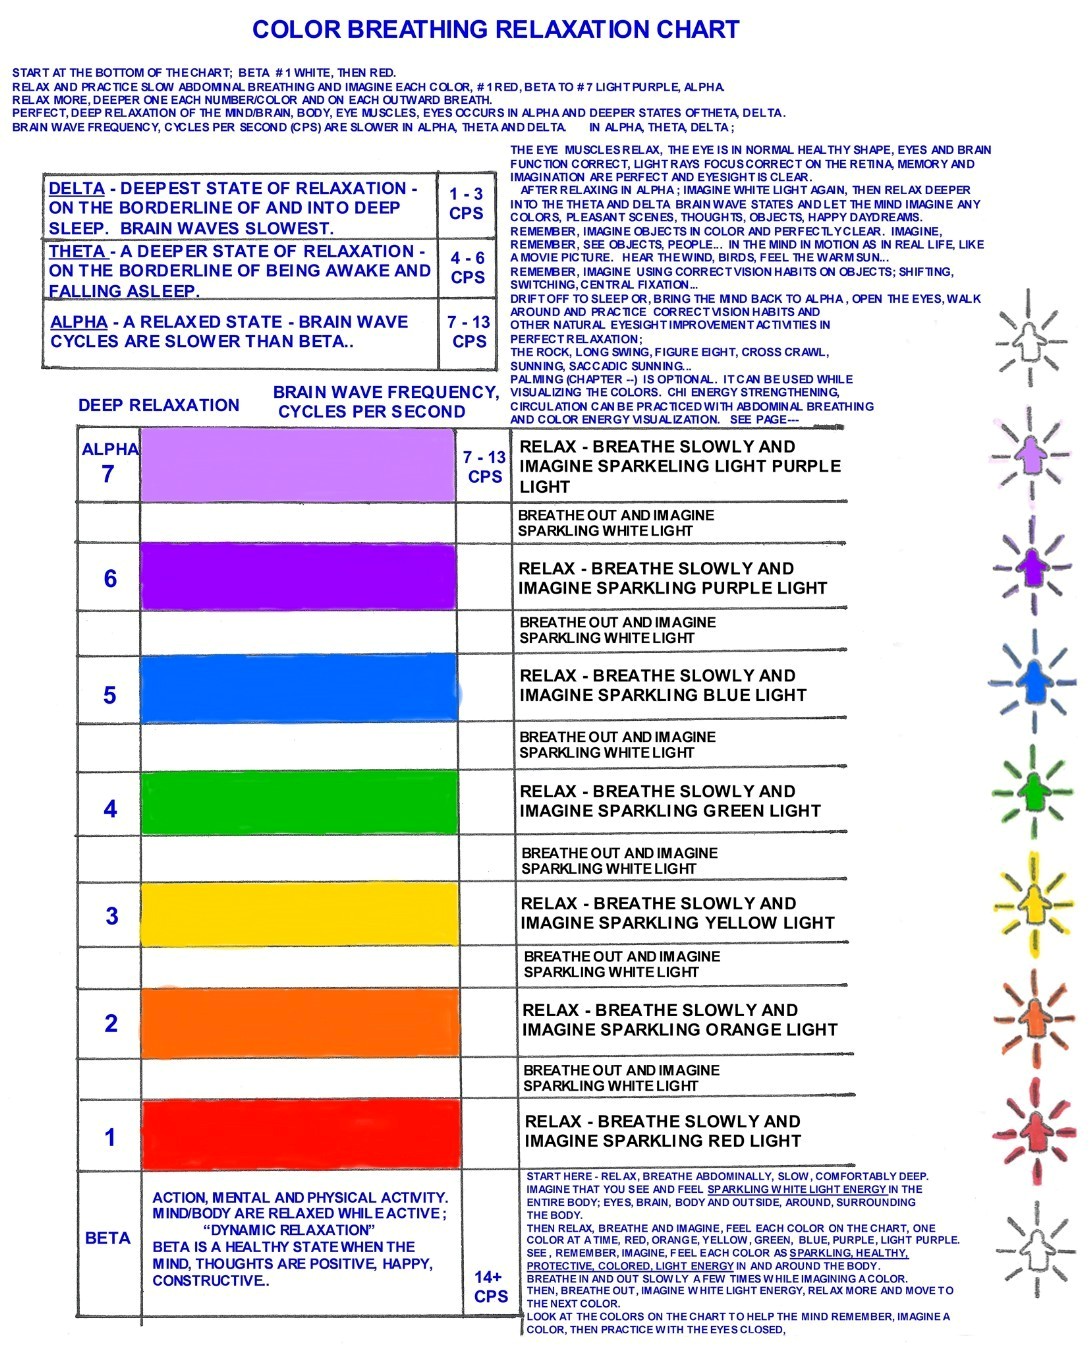 Color Breathing, Energy Chart